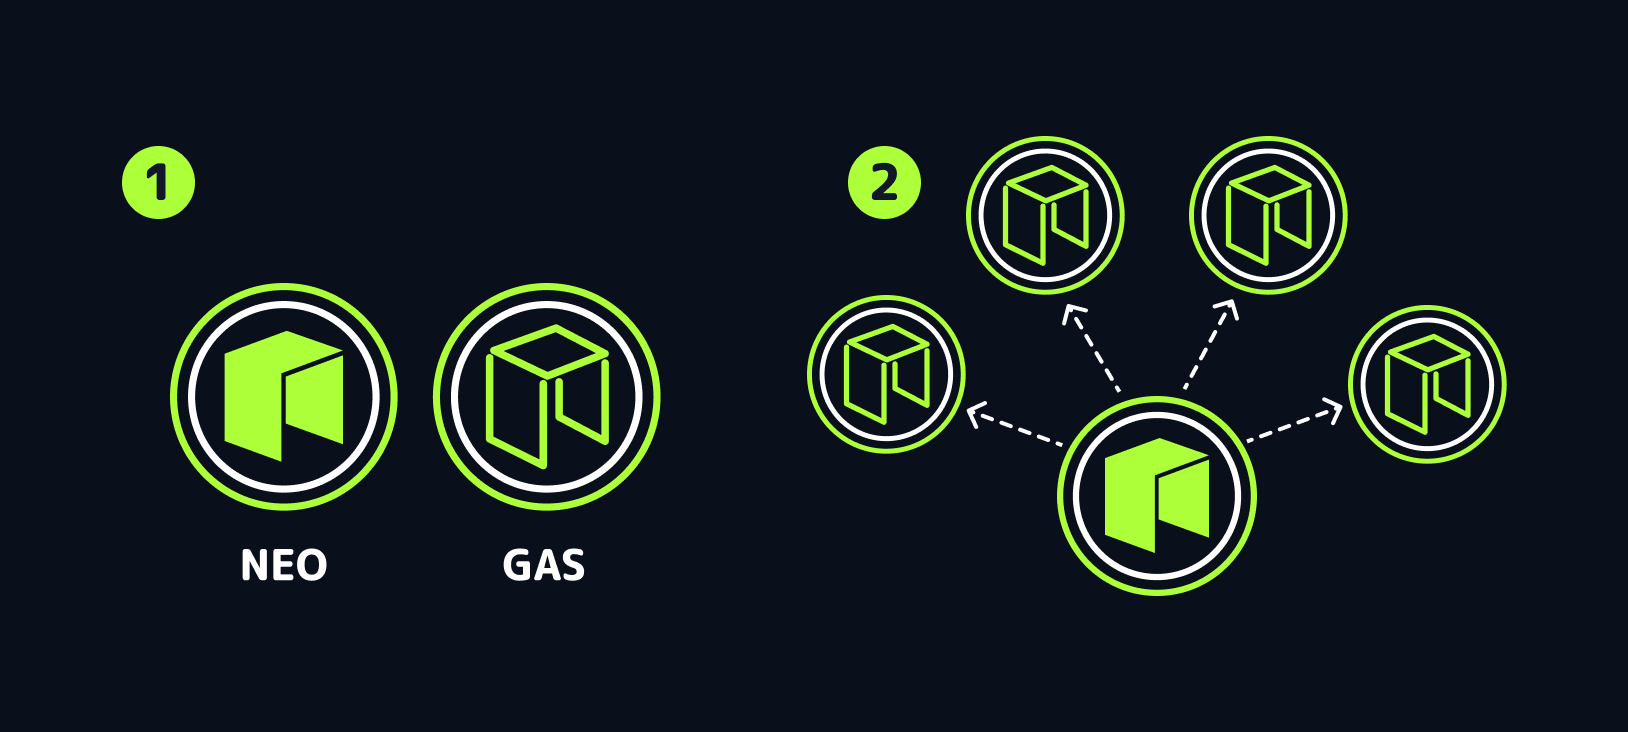 NEO and GAS diagram